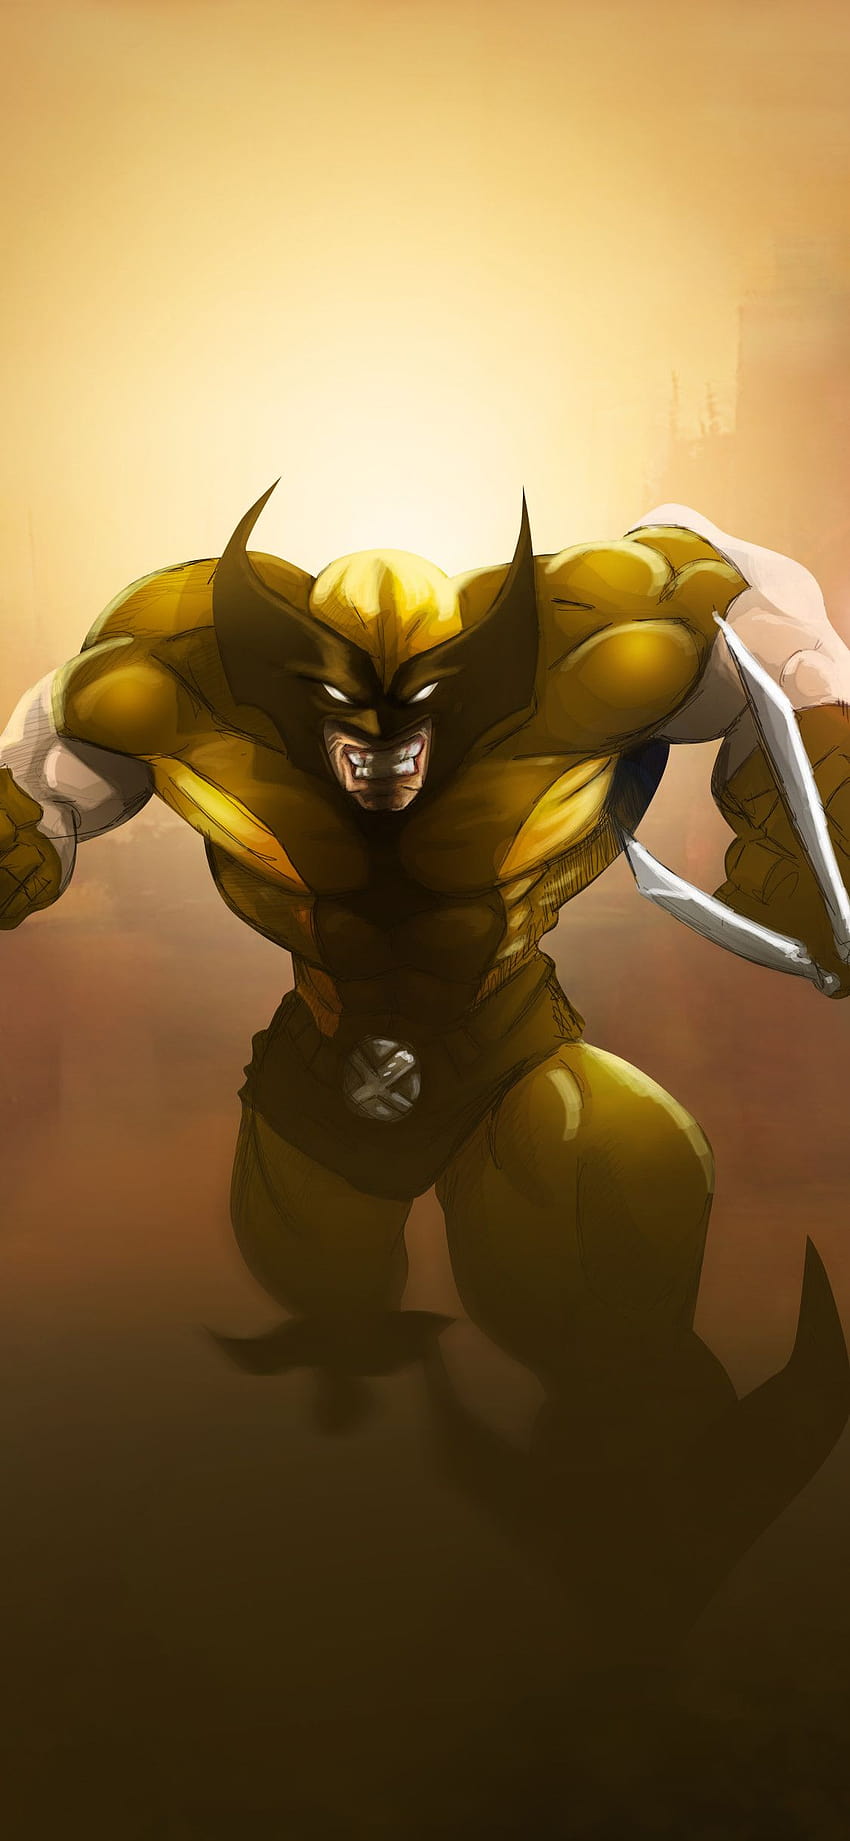 1080x1920 / 1080x1920 wolverine, hd, artist, superheroes, artwork for Iphone  6, 7, 8 wallpaper - Coolwallpapers.me!